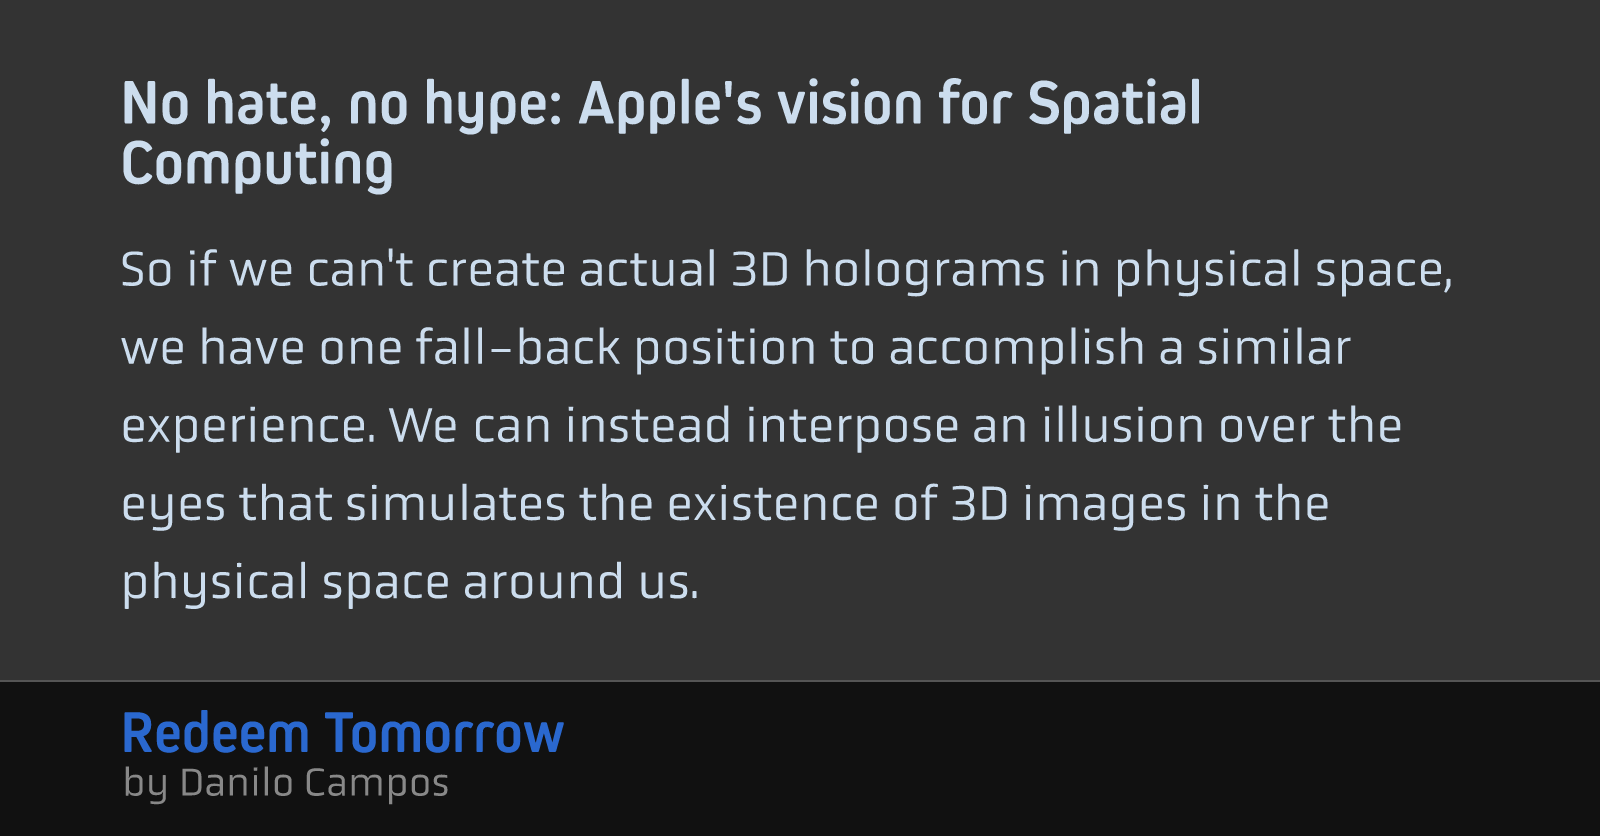 No hate, no hype: Apple's vision for Spatial Computing